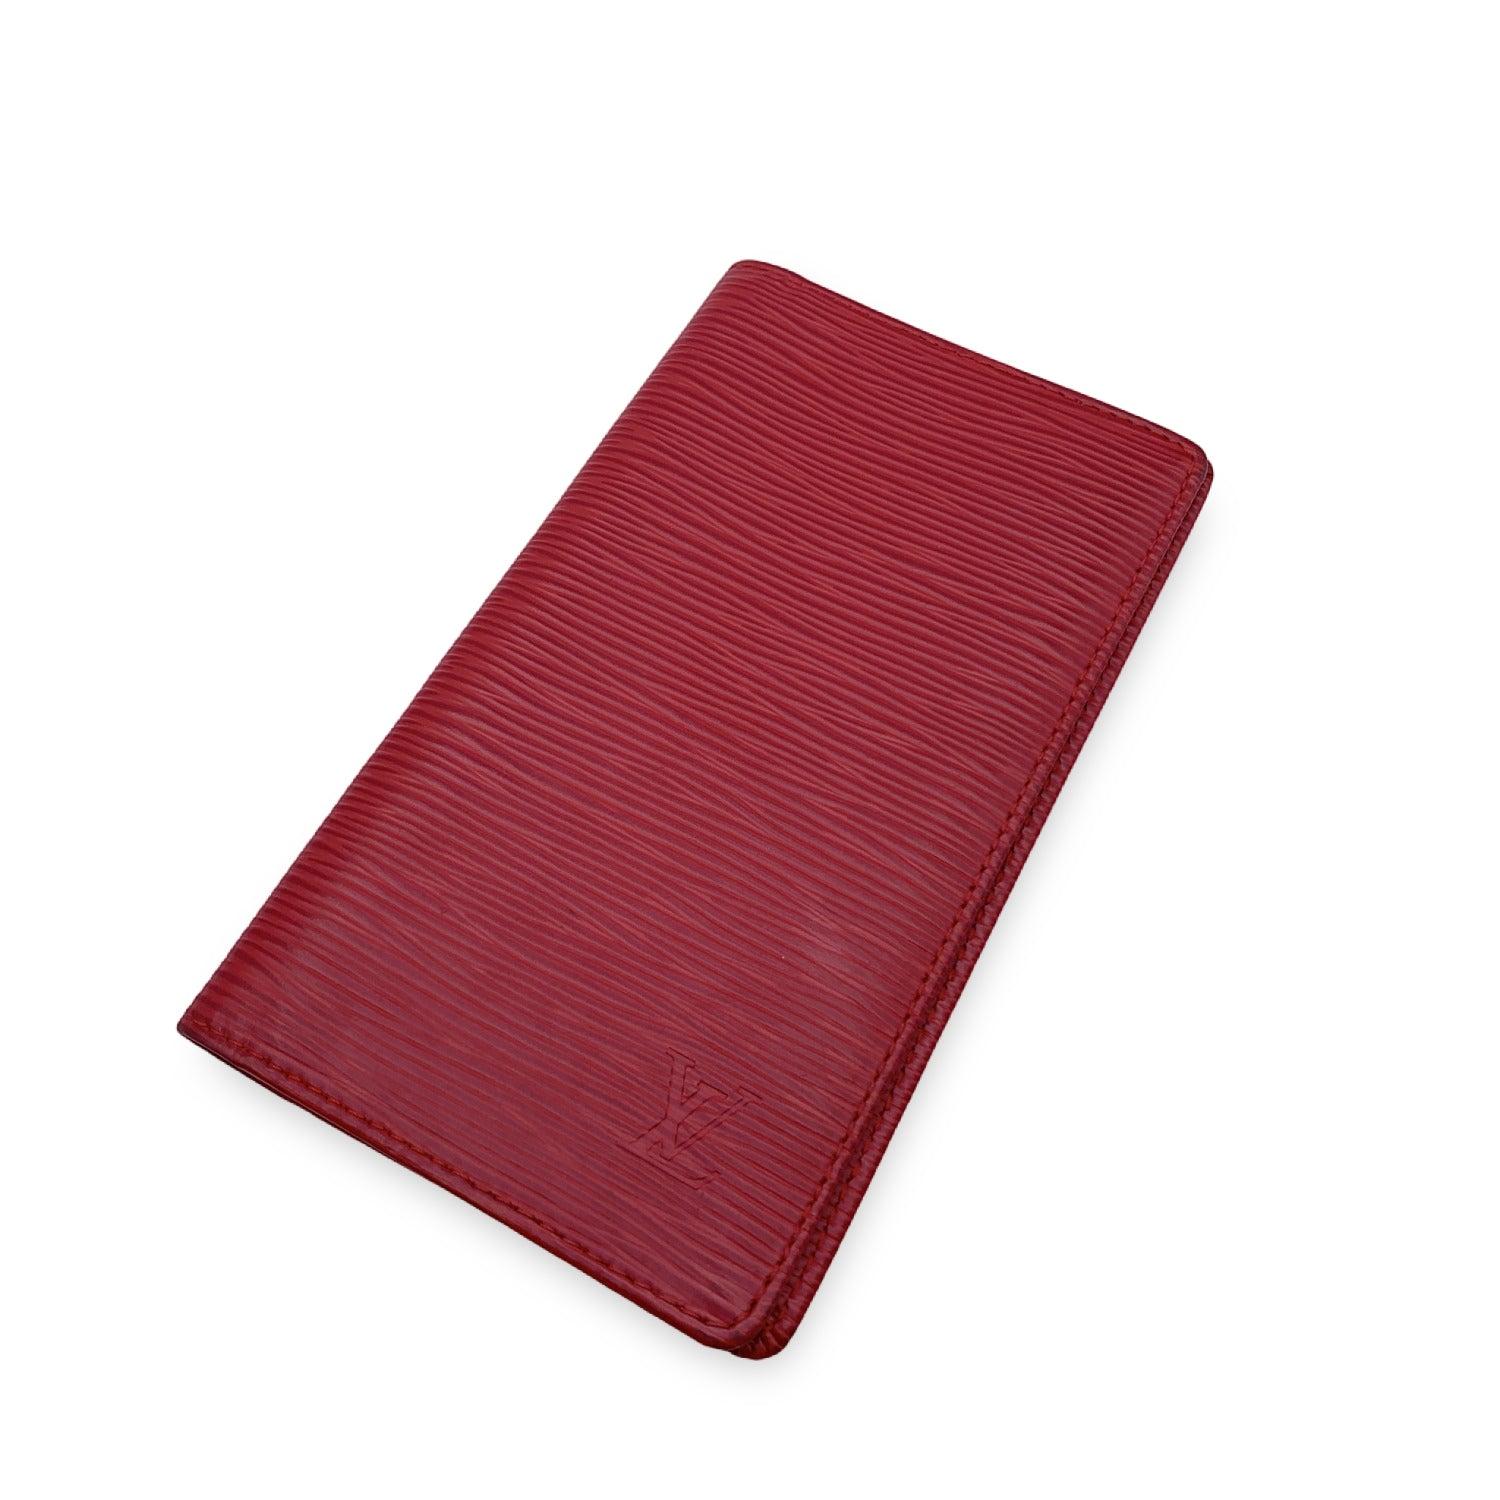 Louis Vuitton red epi leather Vertical Wallet. Red crossgrain leather inside. 2 side pockets and 3 credit card slots inside. Authenticity Serial Number CA0046 inside one of the pockets. 'LOUIS VUITTON Paris - made in Spain' embossed inside. Details